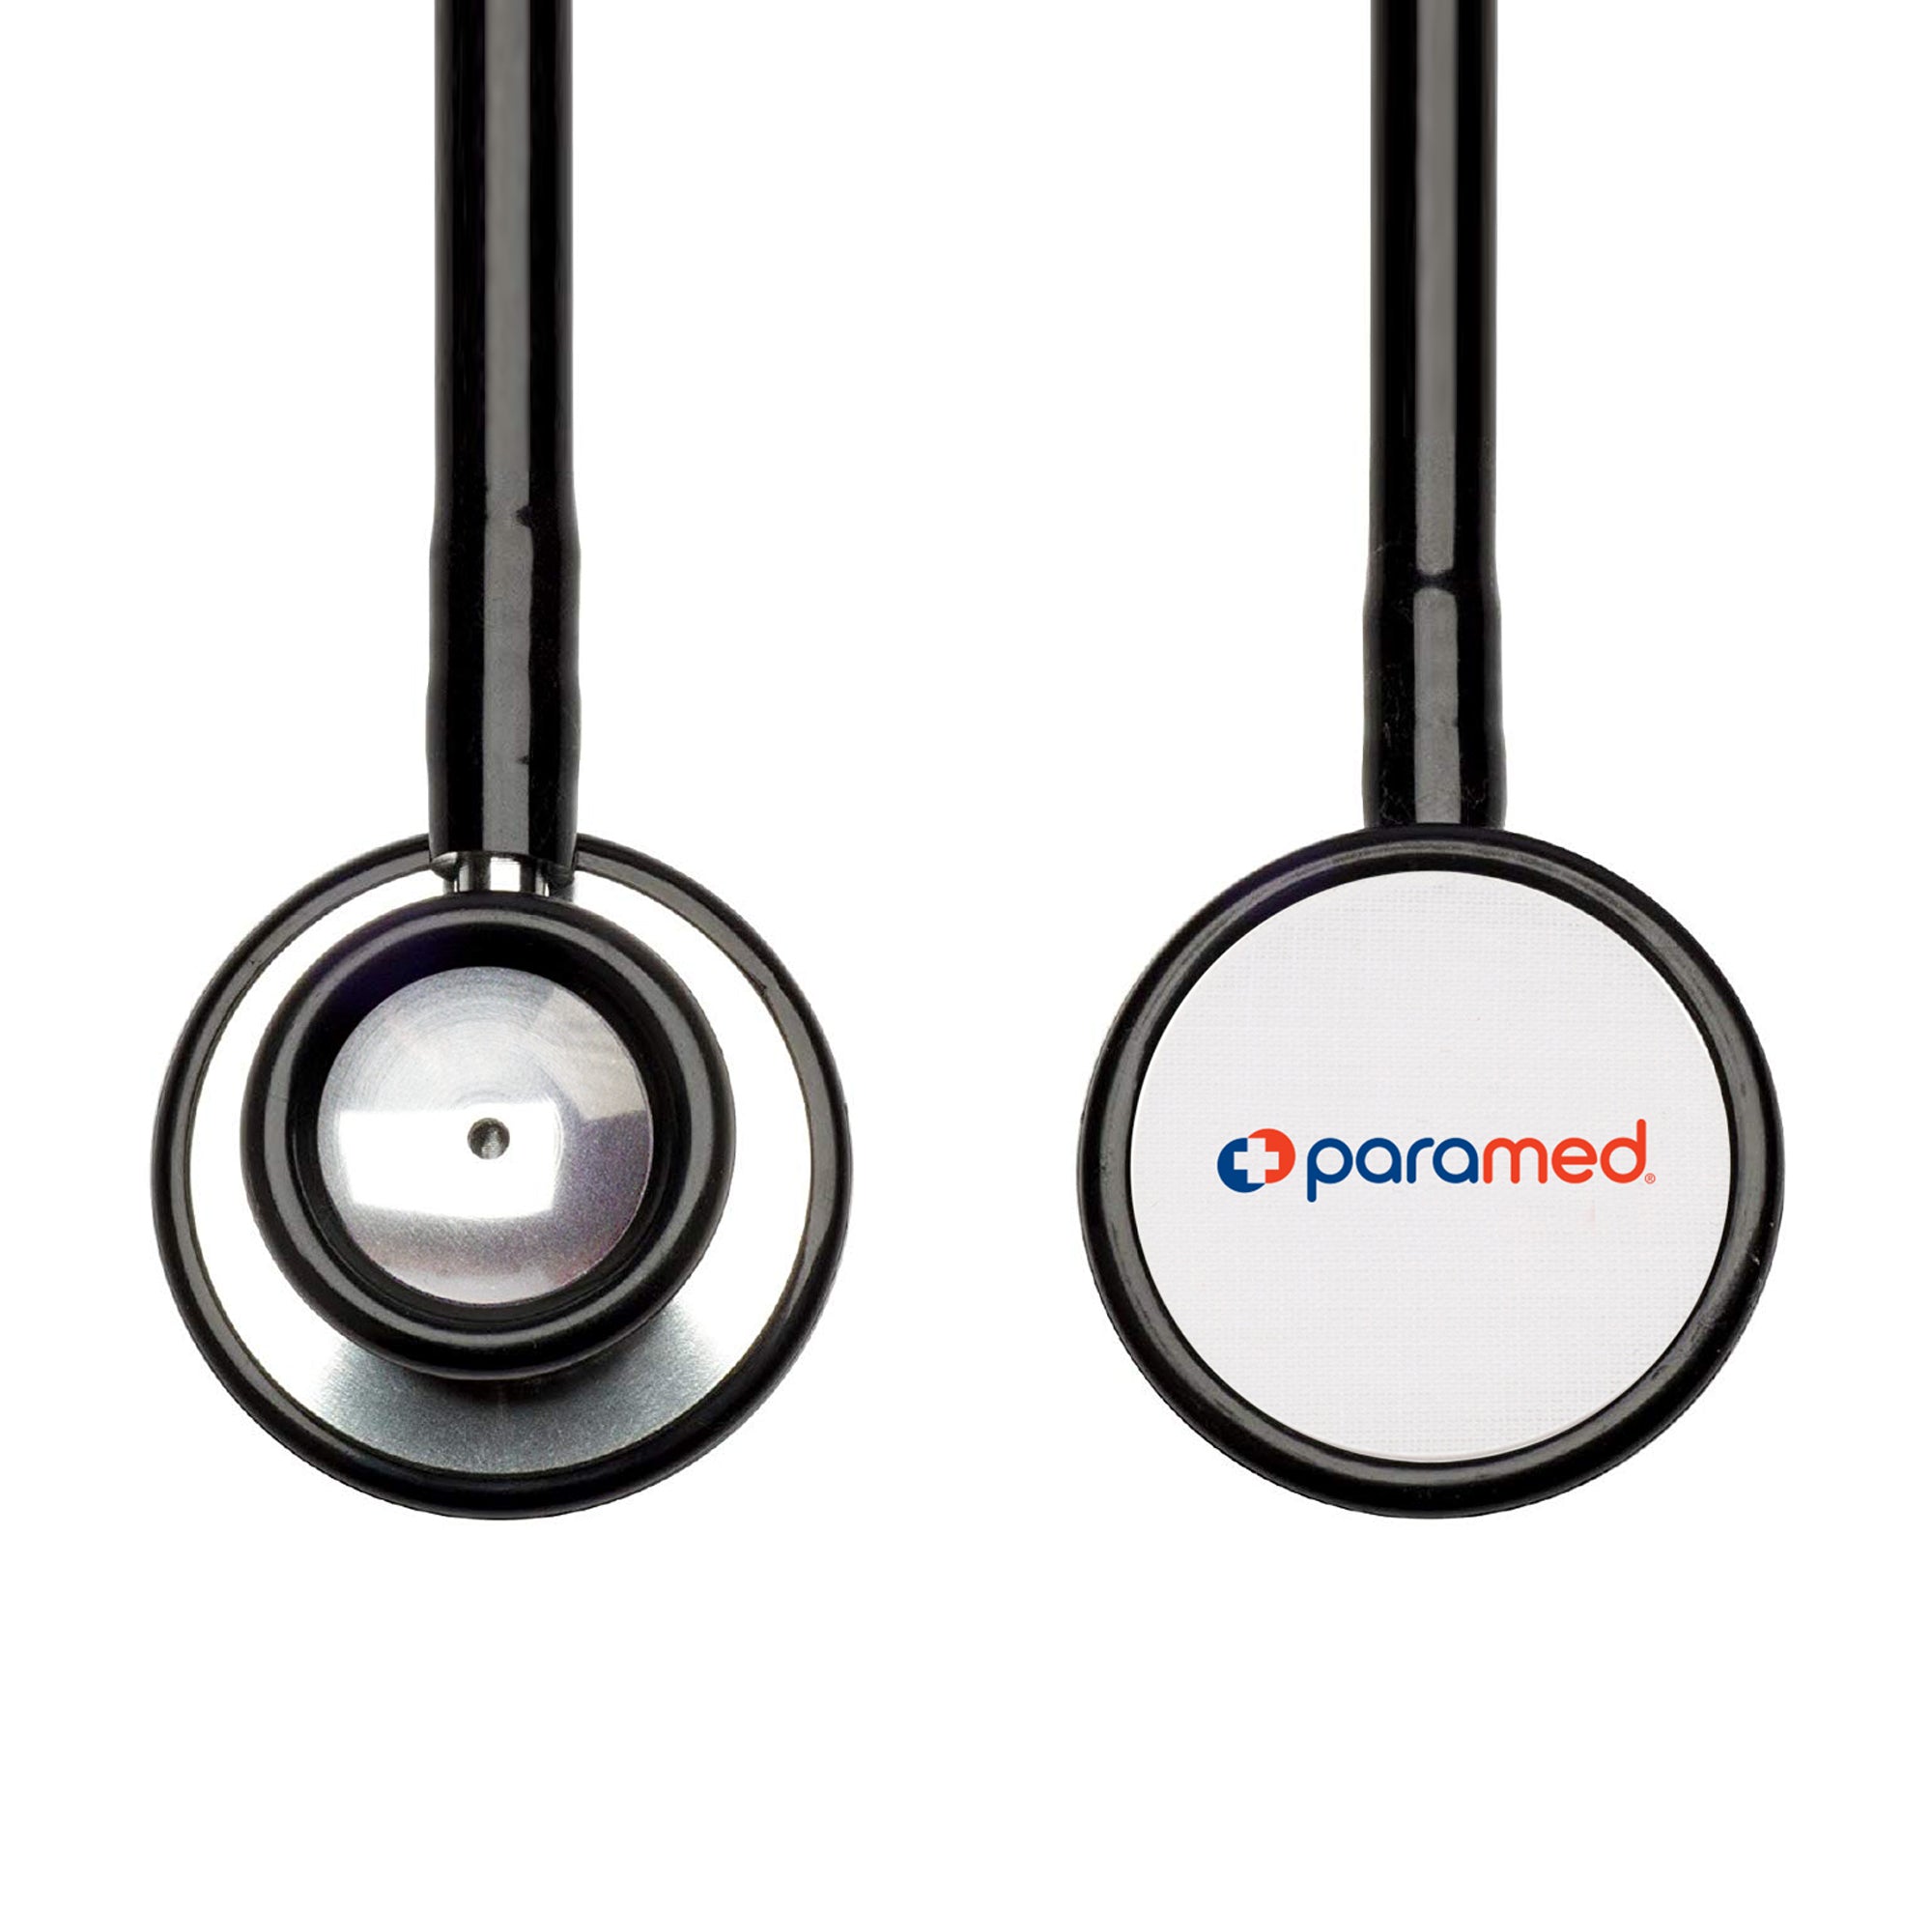 Dual head stethoscope for clinical and home use Paramed RH 3012 – Paramed  Store